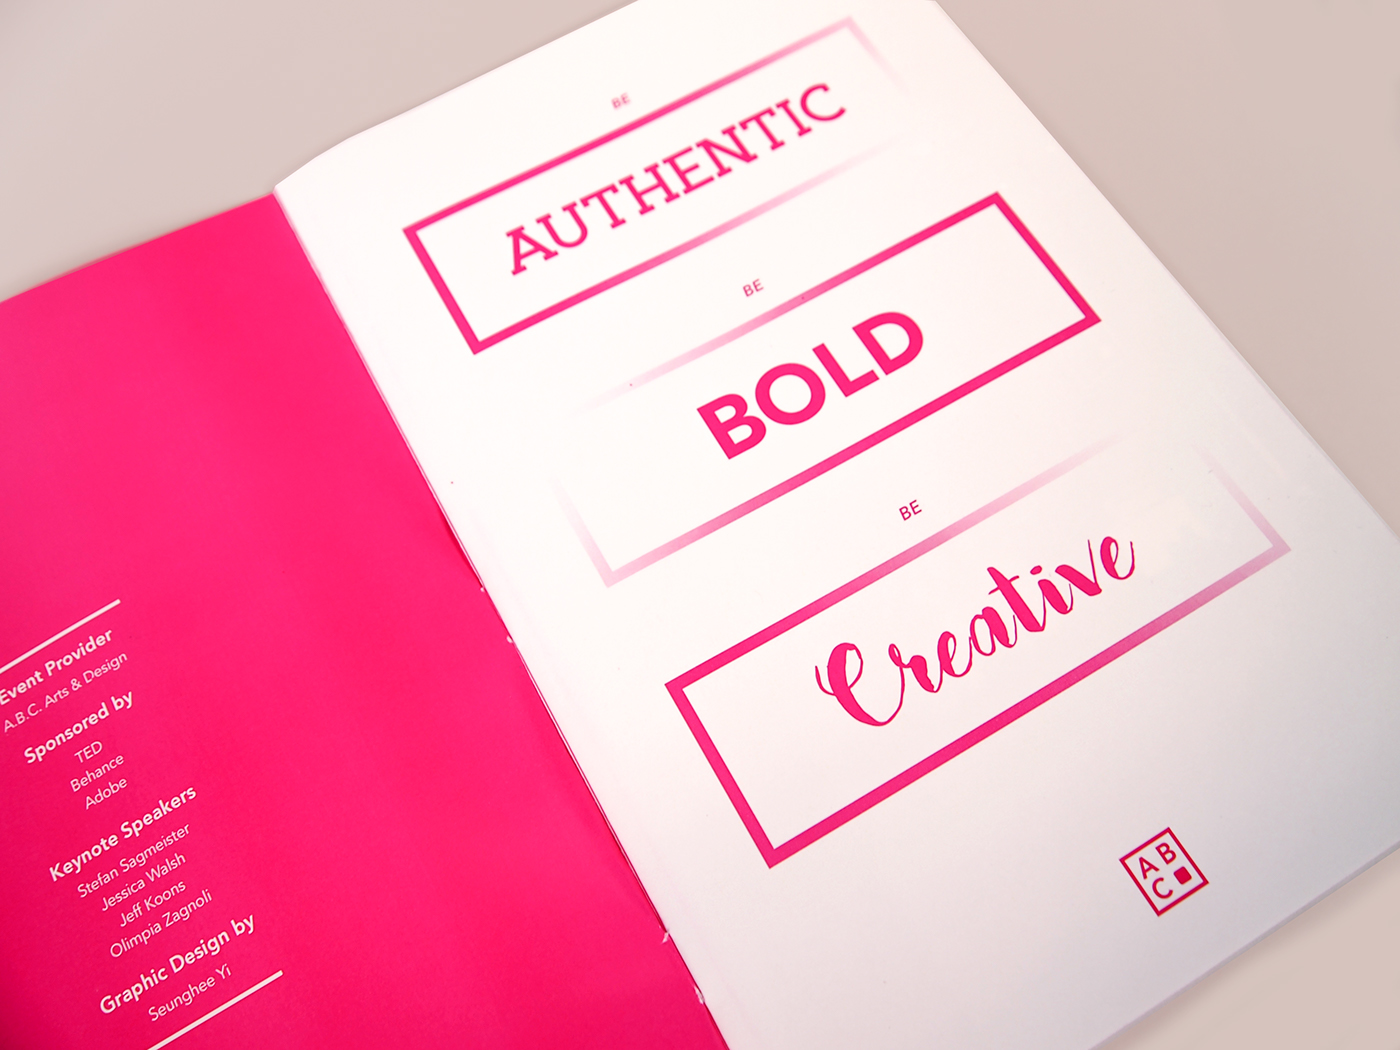 conference Confert conference branding branding set Collateral Poster Design booklet design type creative